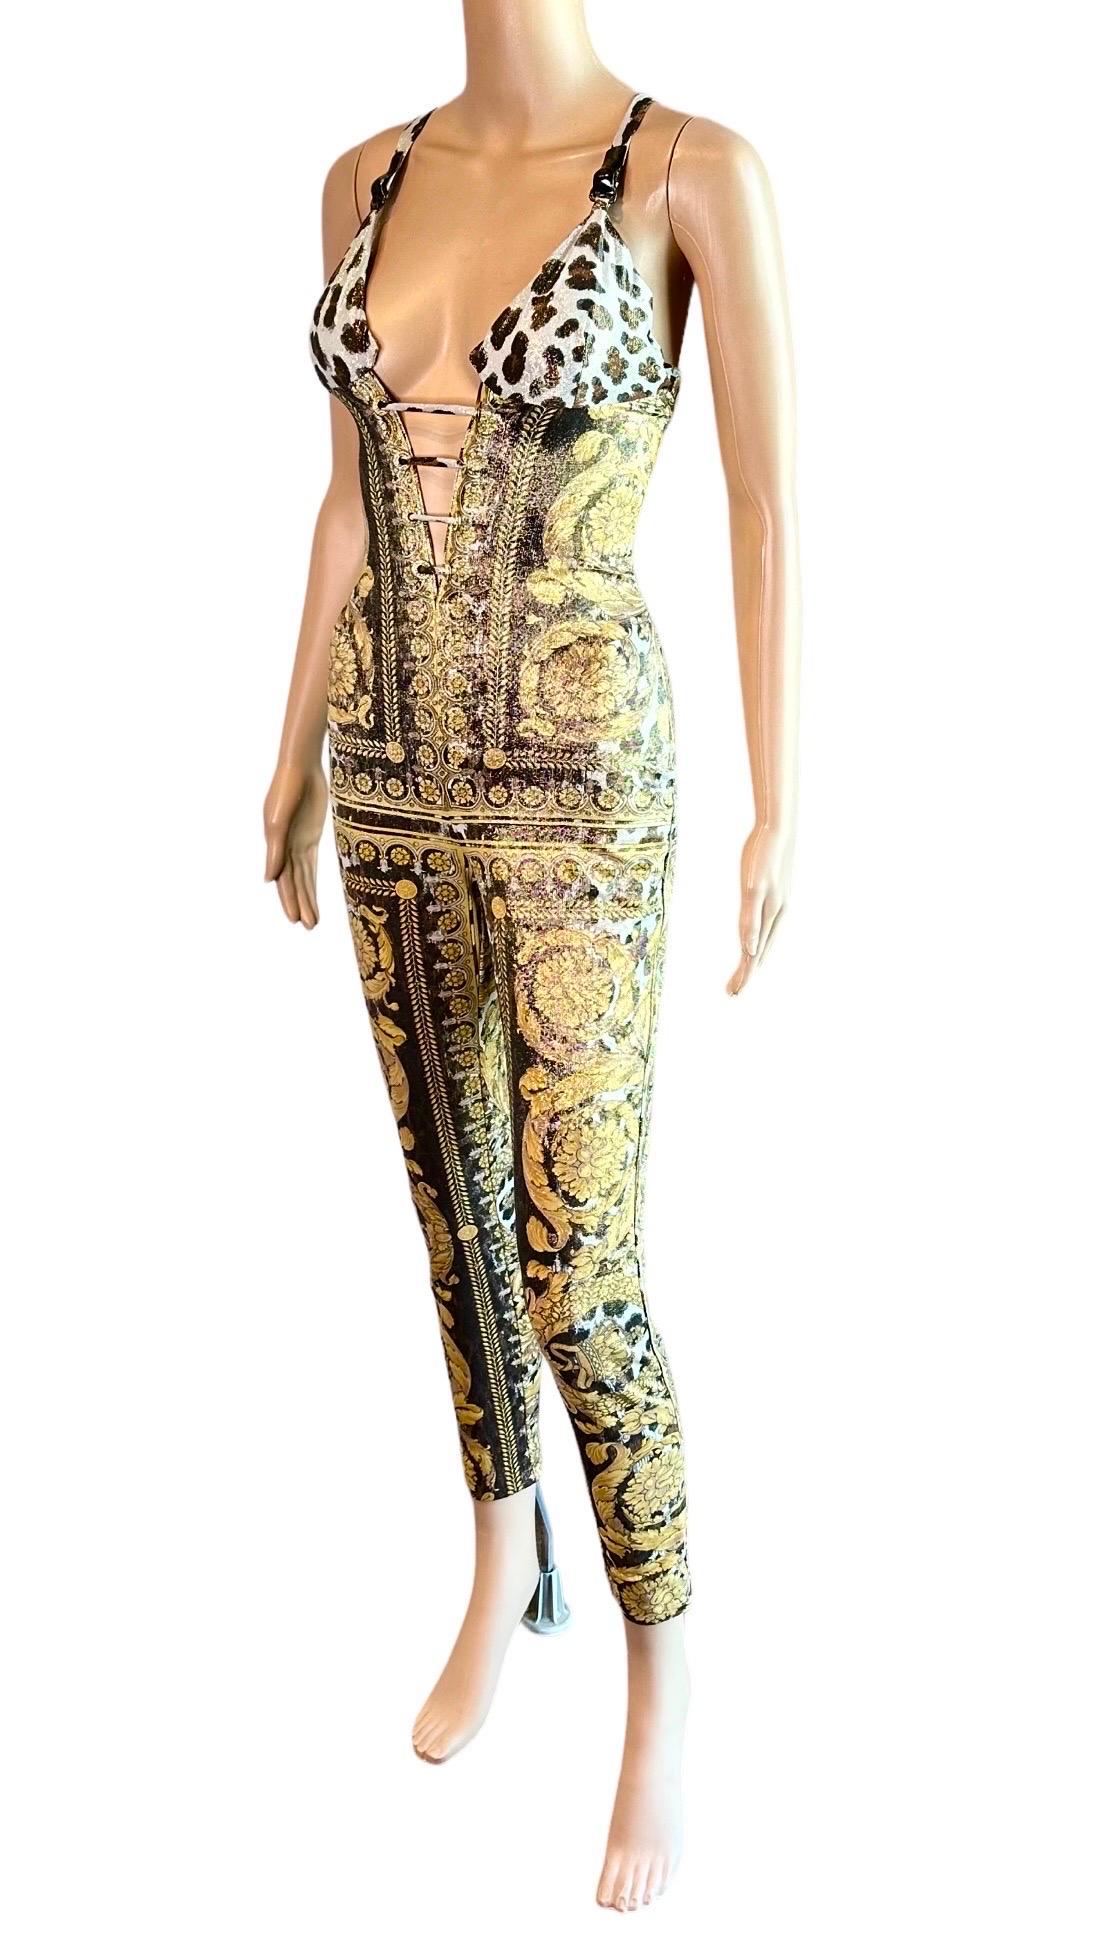 Gianni Versace S/S 1992 Runway Bustier Embellished Baroque Catsuit Jumpsuit For Sale 1